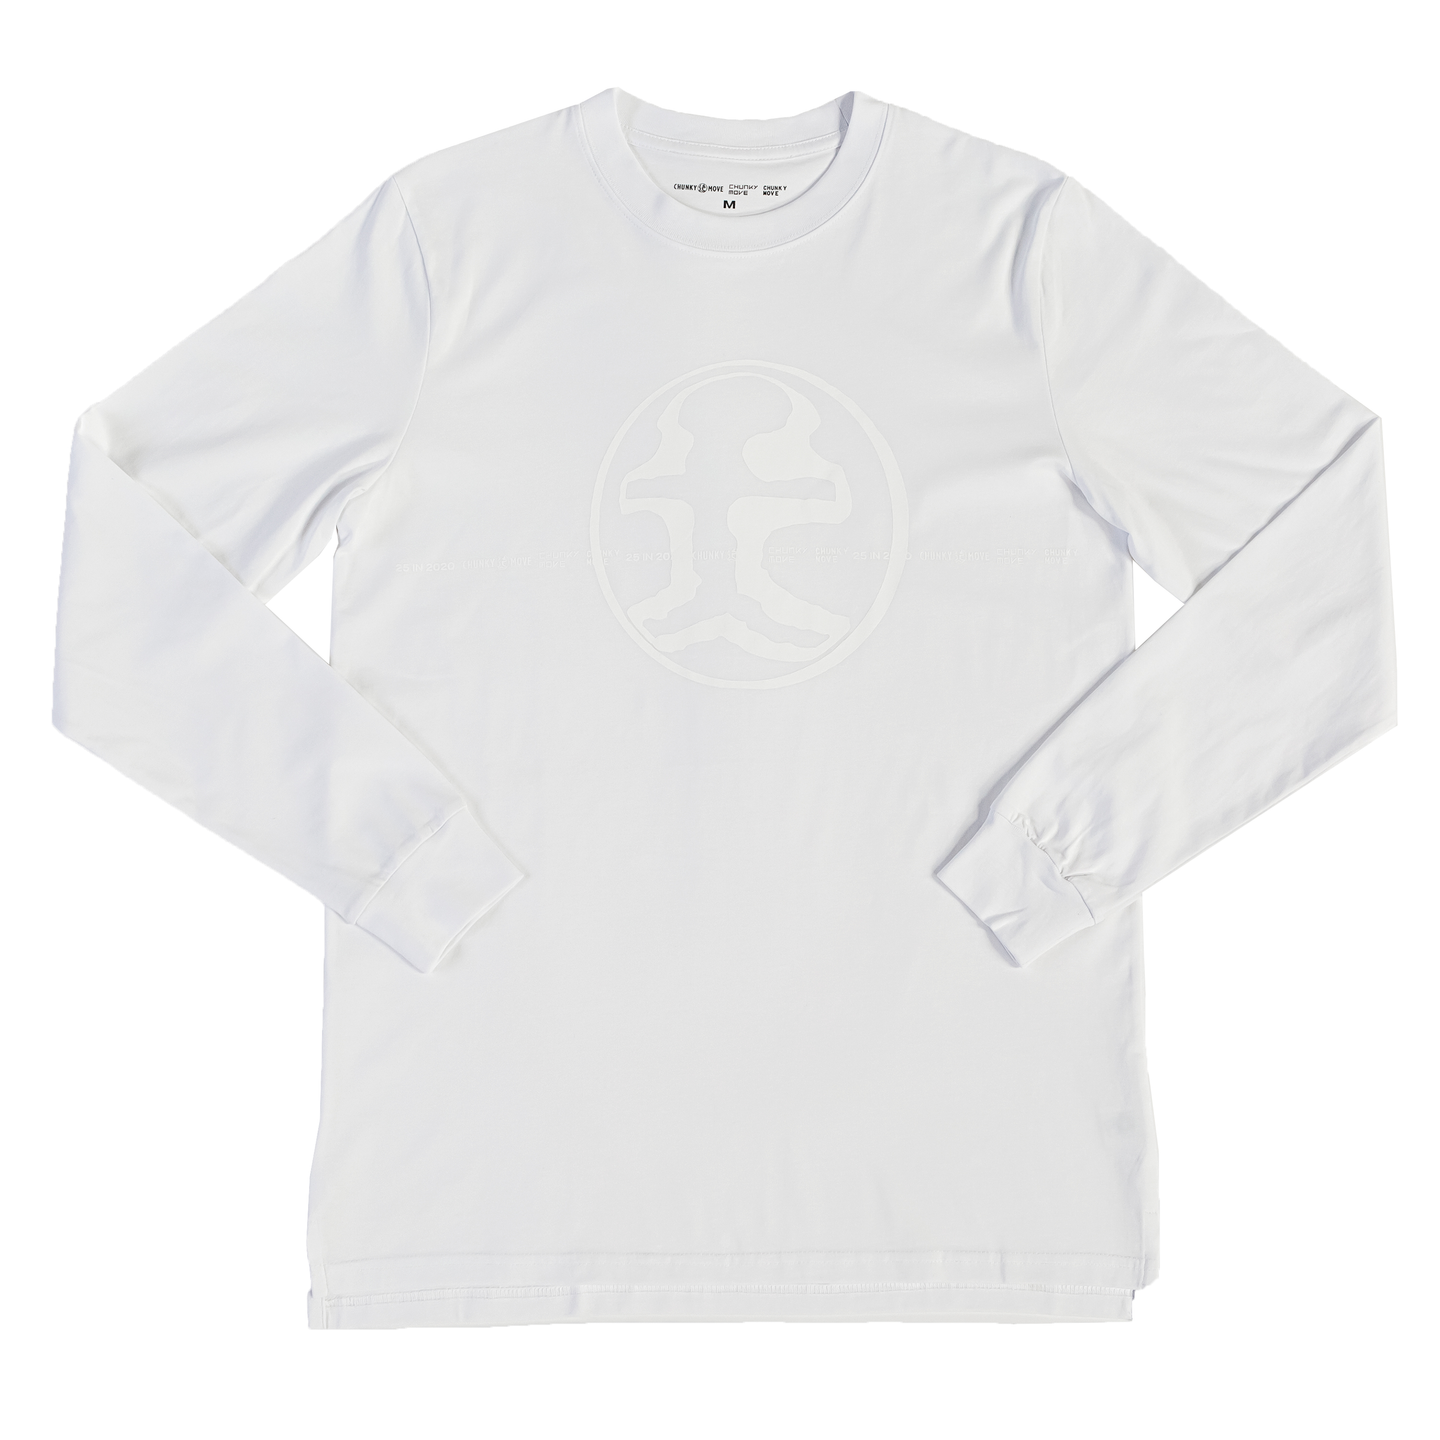 WHITE 25in2020 L/S T.SHIRT